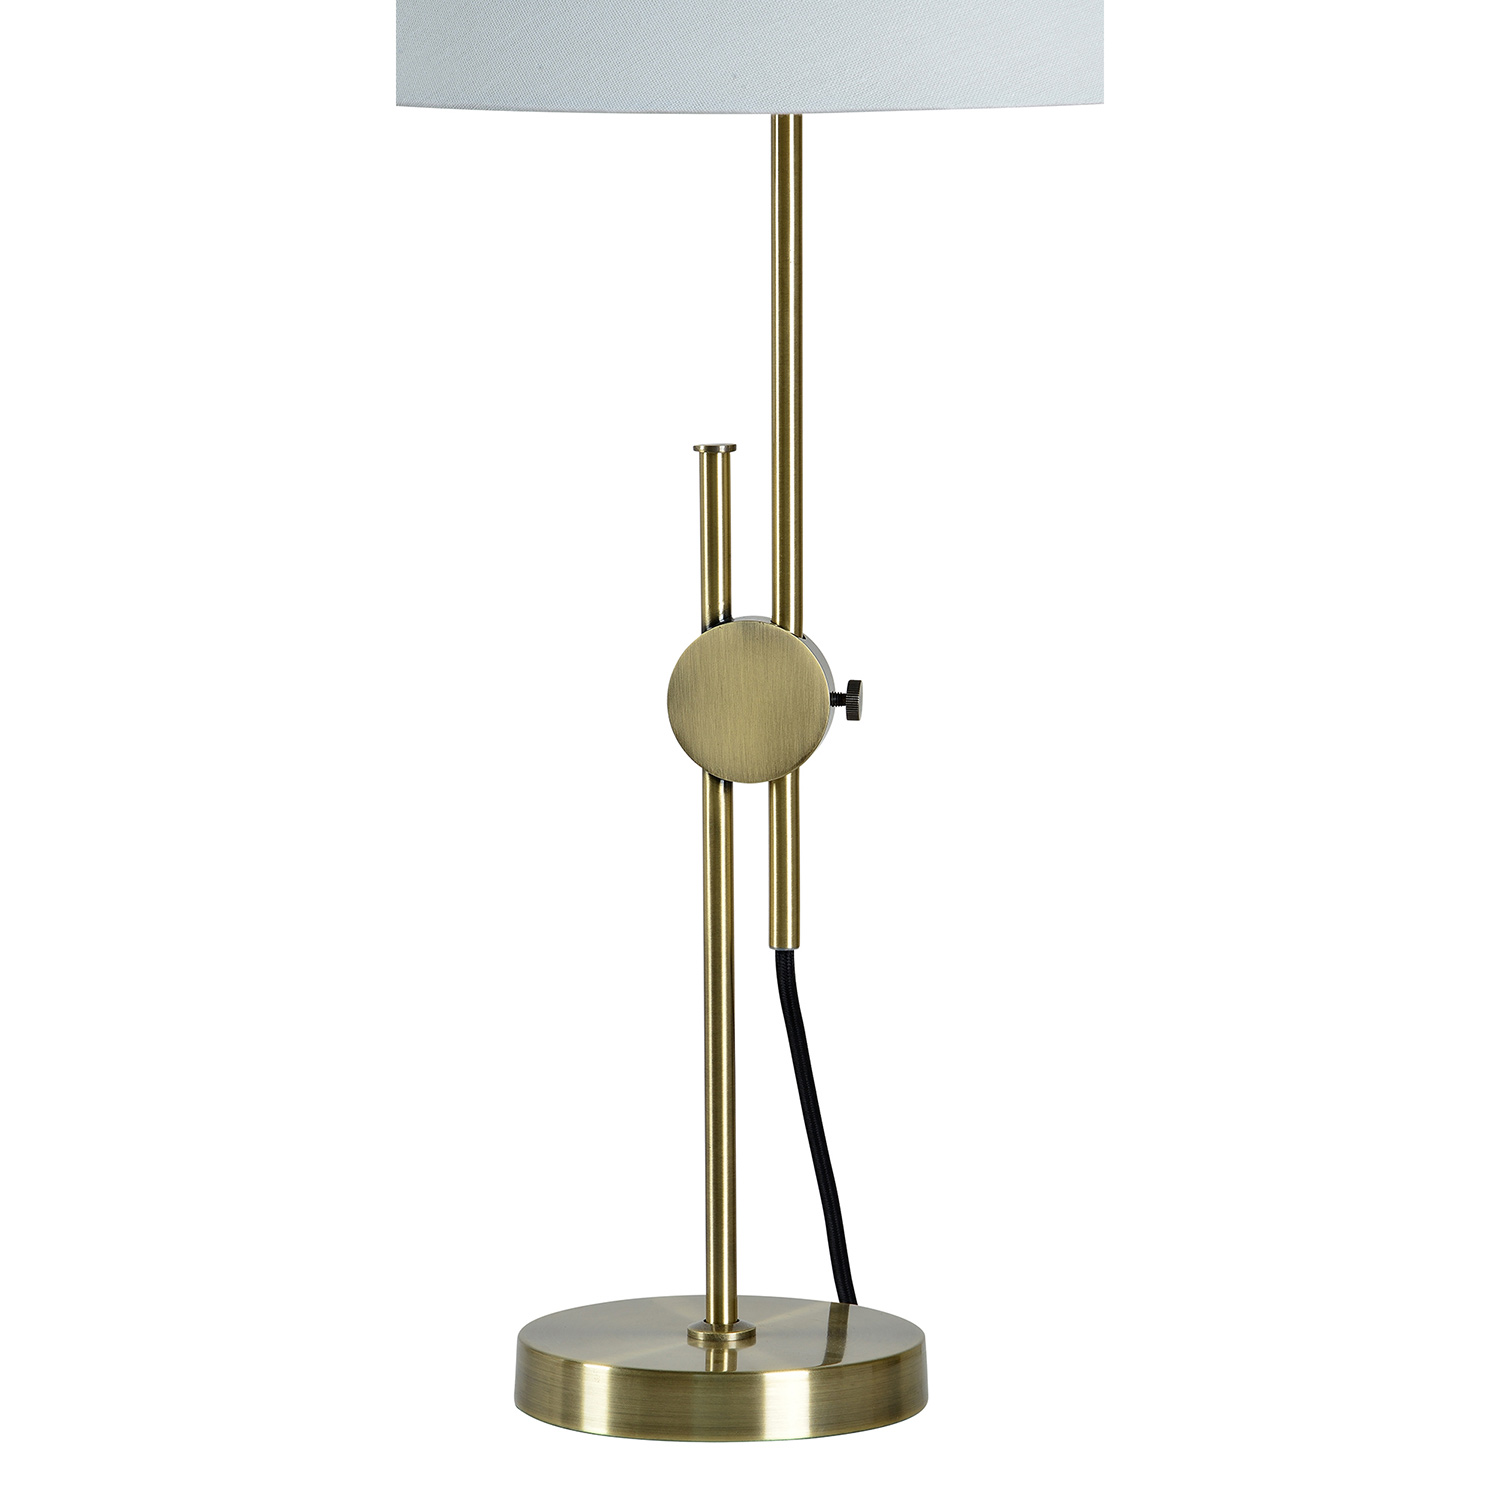 Ren-Wil Carswell Table Lamp - Antique Brass